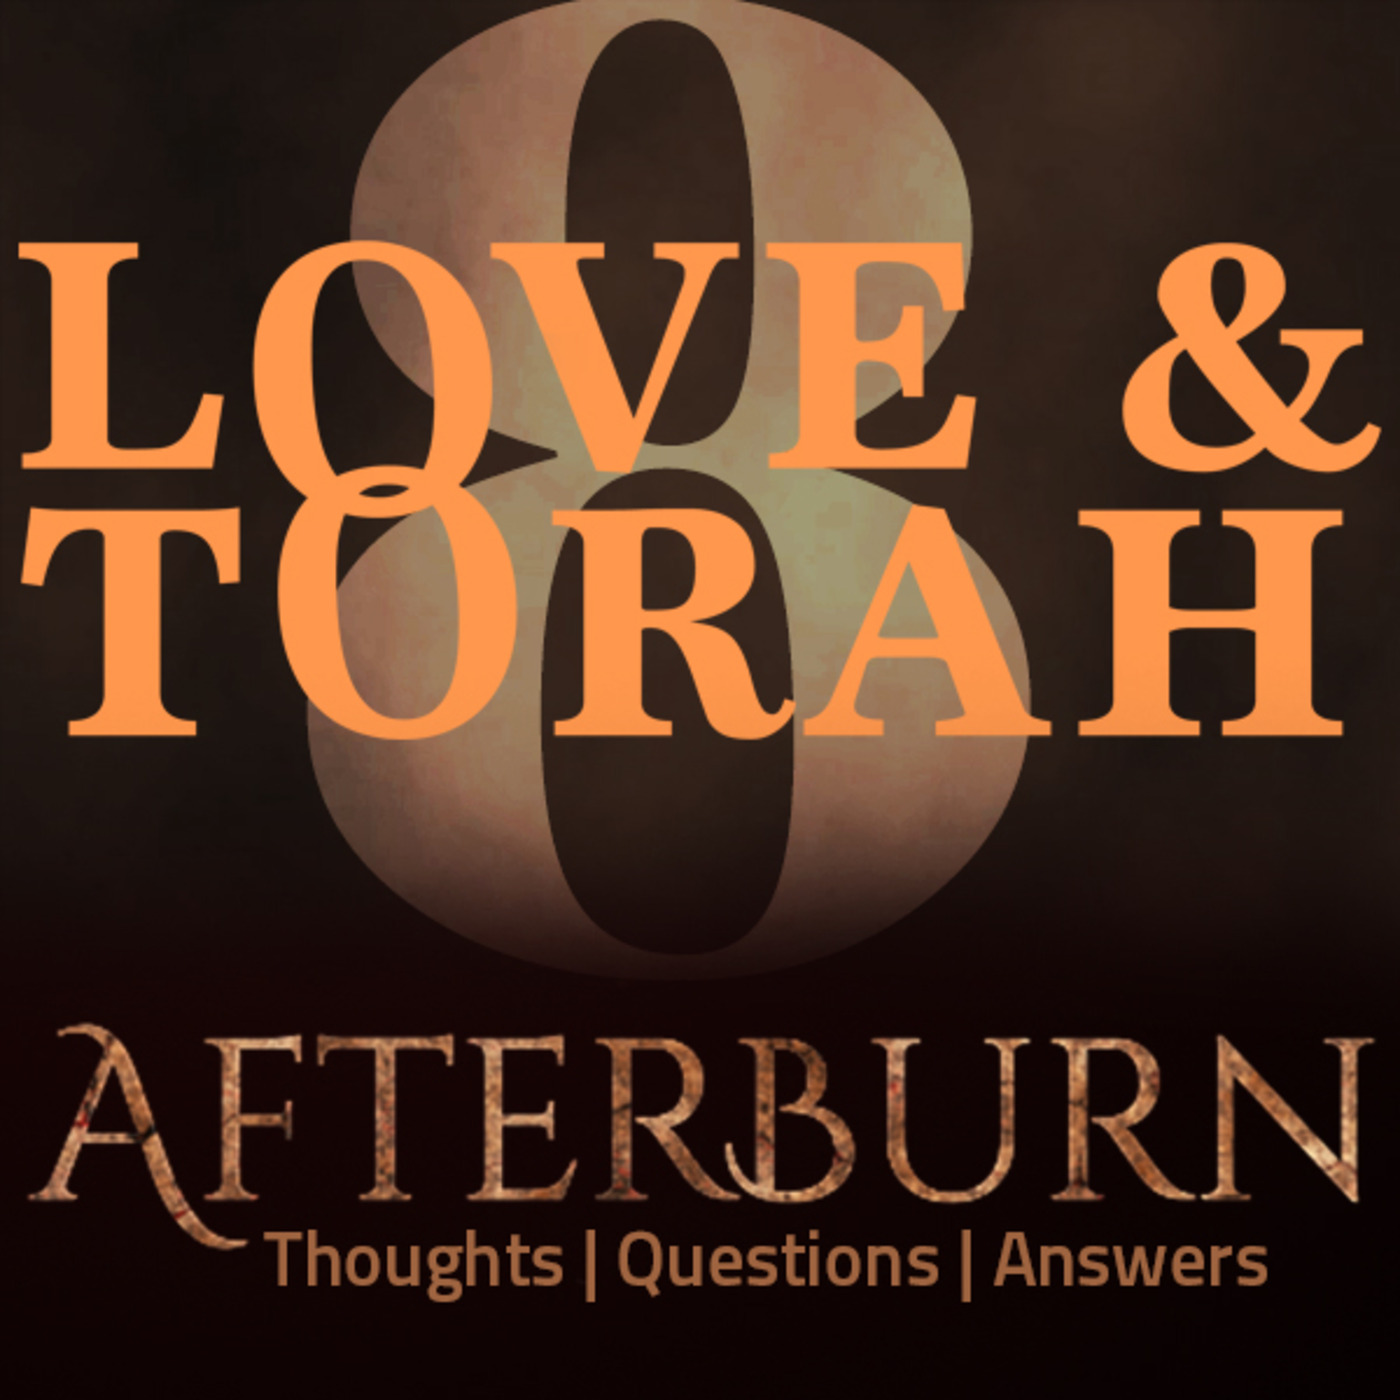 Afterburn: Thoughts, Q&A on Love and Torah - Part 8